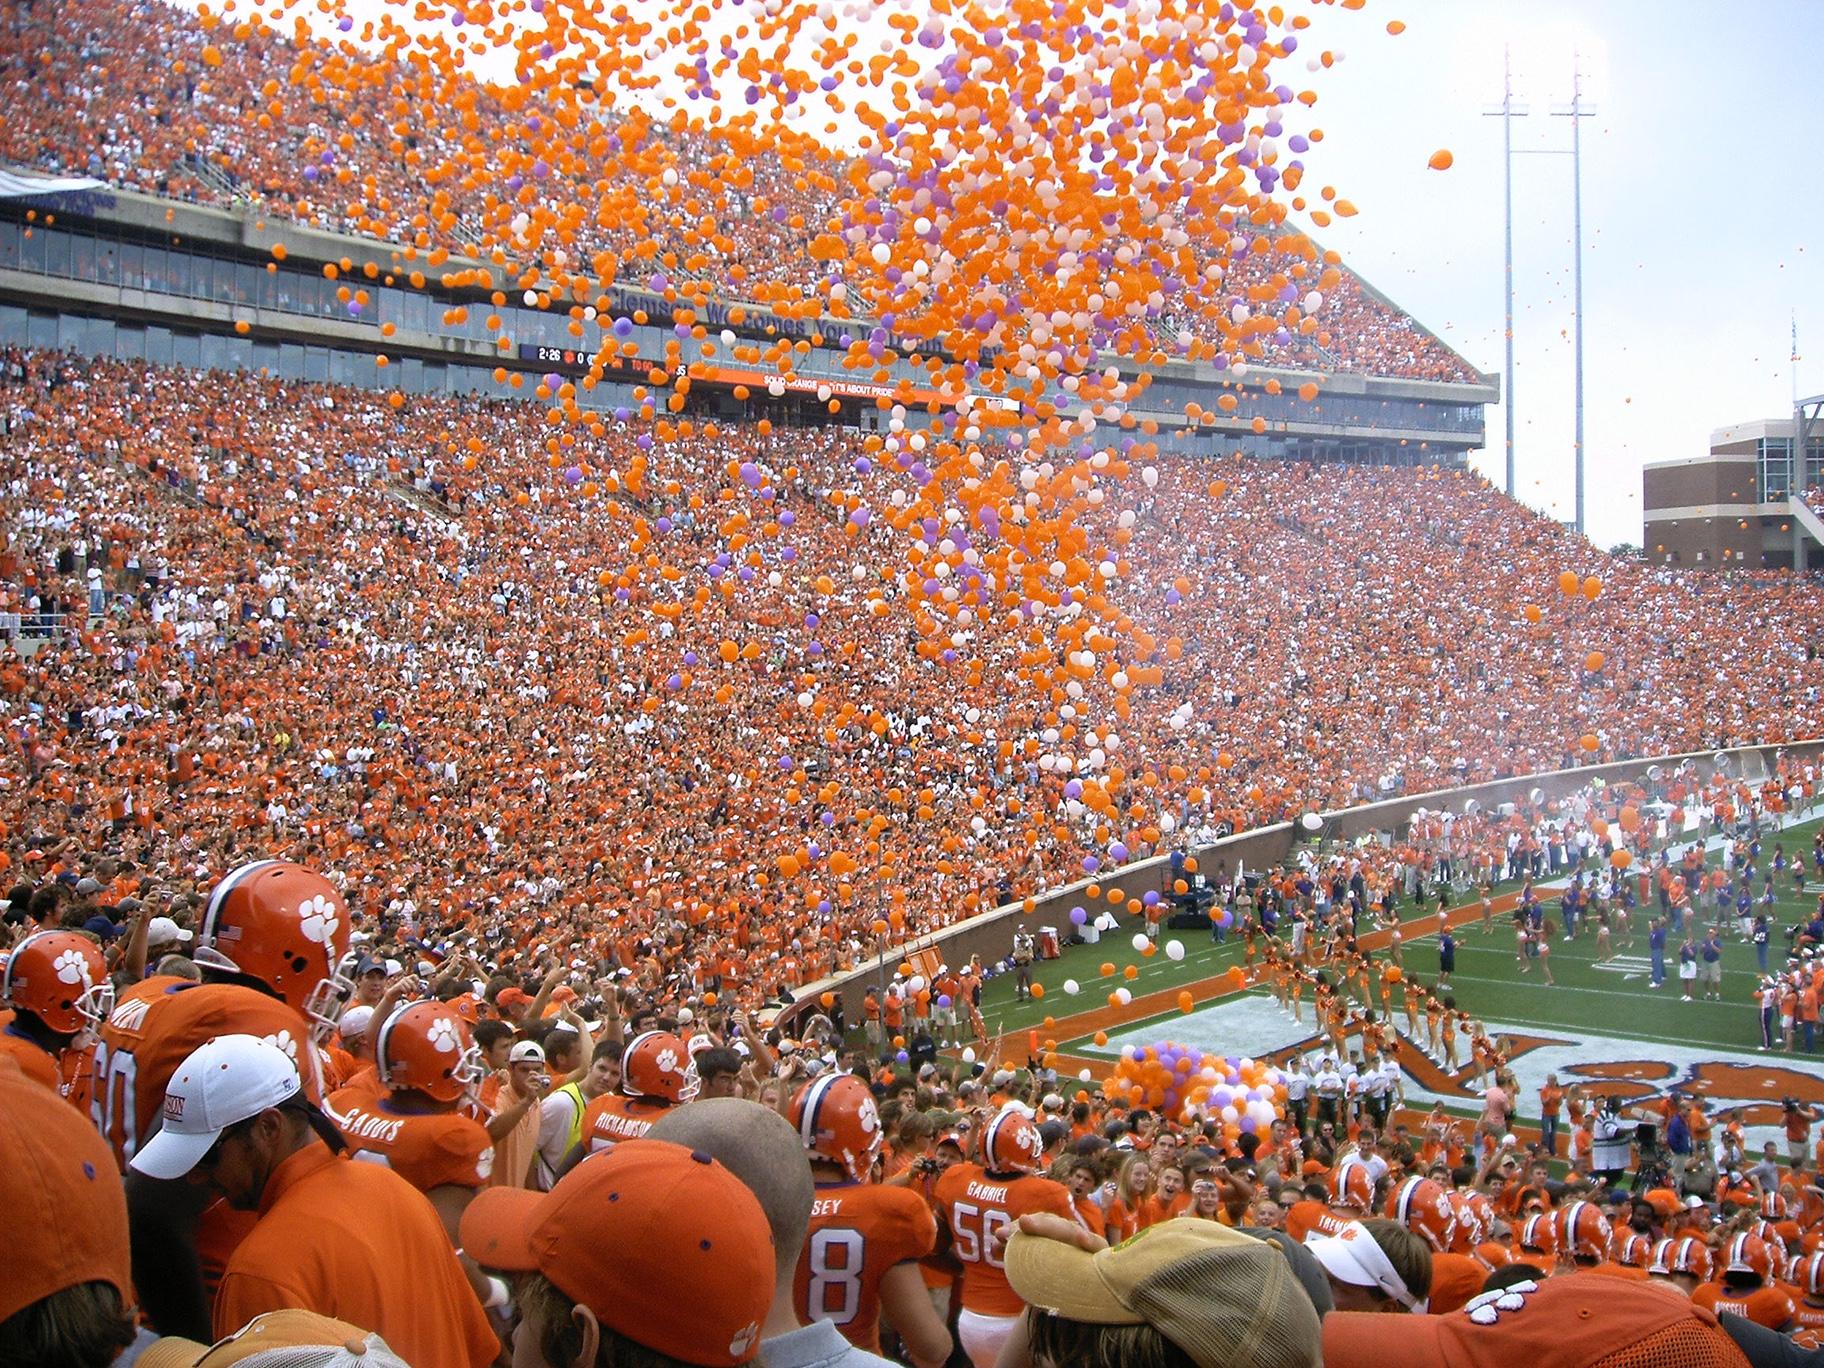 Clemson University ended a 30-year tradition of releasing thousands of orange balloons before football games last year after facing pressure from environmental and animal rights groups. (Jason A G / Flickr) 